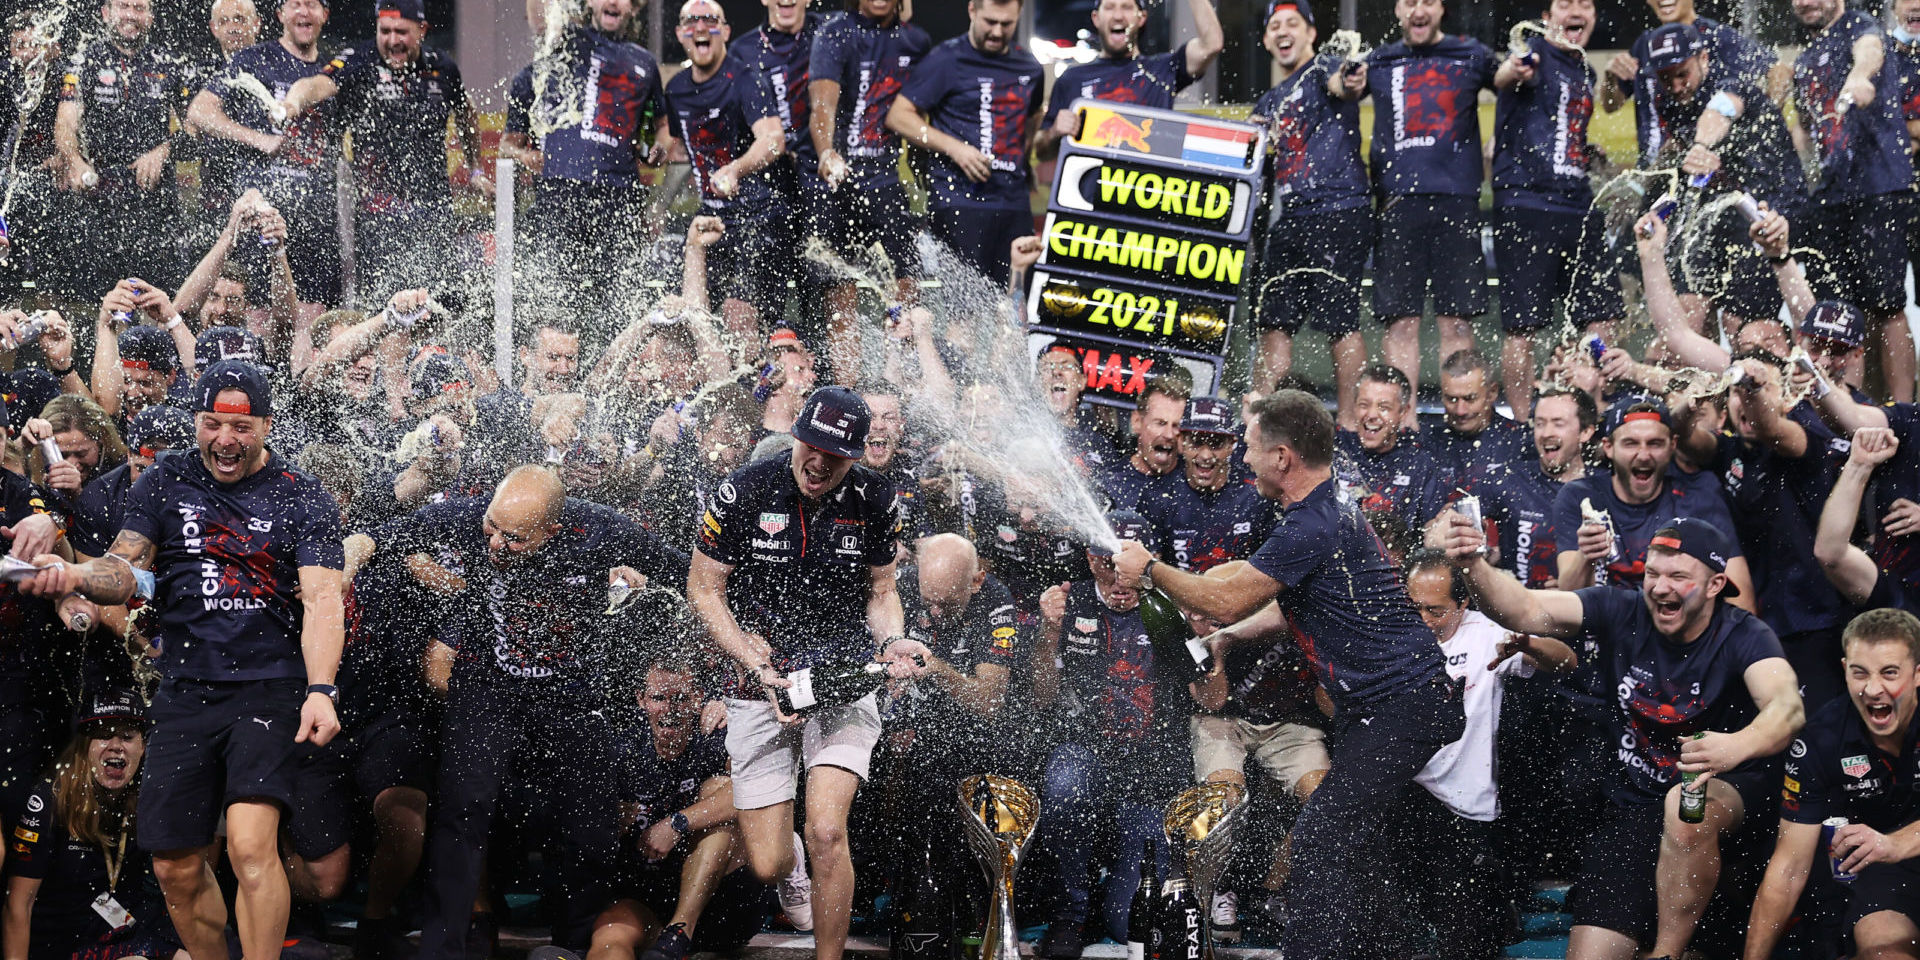 ABU DHABI, UNITED ARAB EMIRATES - DECEMBER 12: Race winner and 2021 F1 World Drivers Champion Max Verstappen of Netherlands and Red Bull Racing celebrates with his team after the F1 Grand Prix of Abu Dhabi at Yas Marina Circuit on December 12, 2021 in Abu Dhabi, United Arab Emirates. (Photo by Lars Baron/Getty Images) // Getty Images / Red Bull Content Pool // SI202112120622 // Usage for editorial use only //